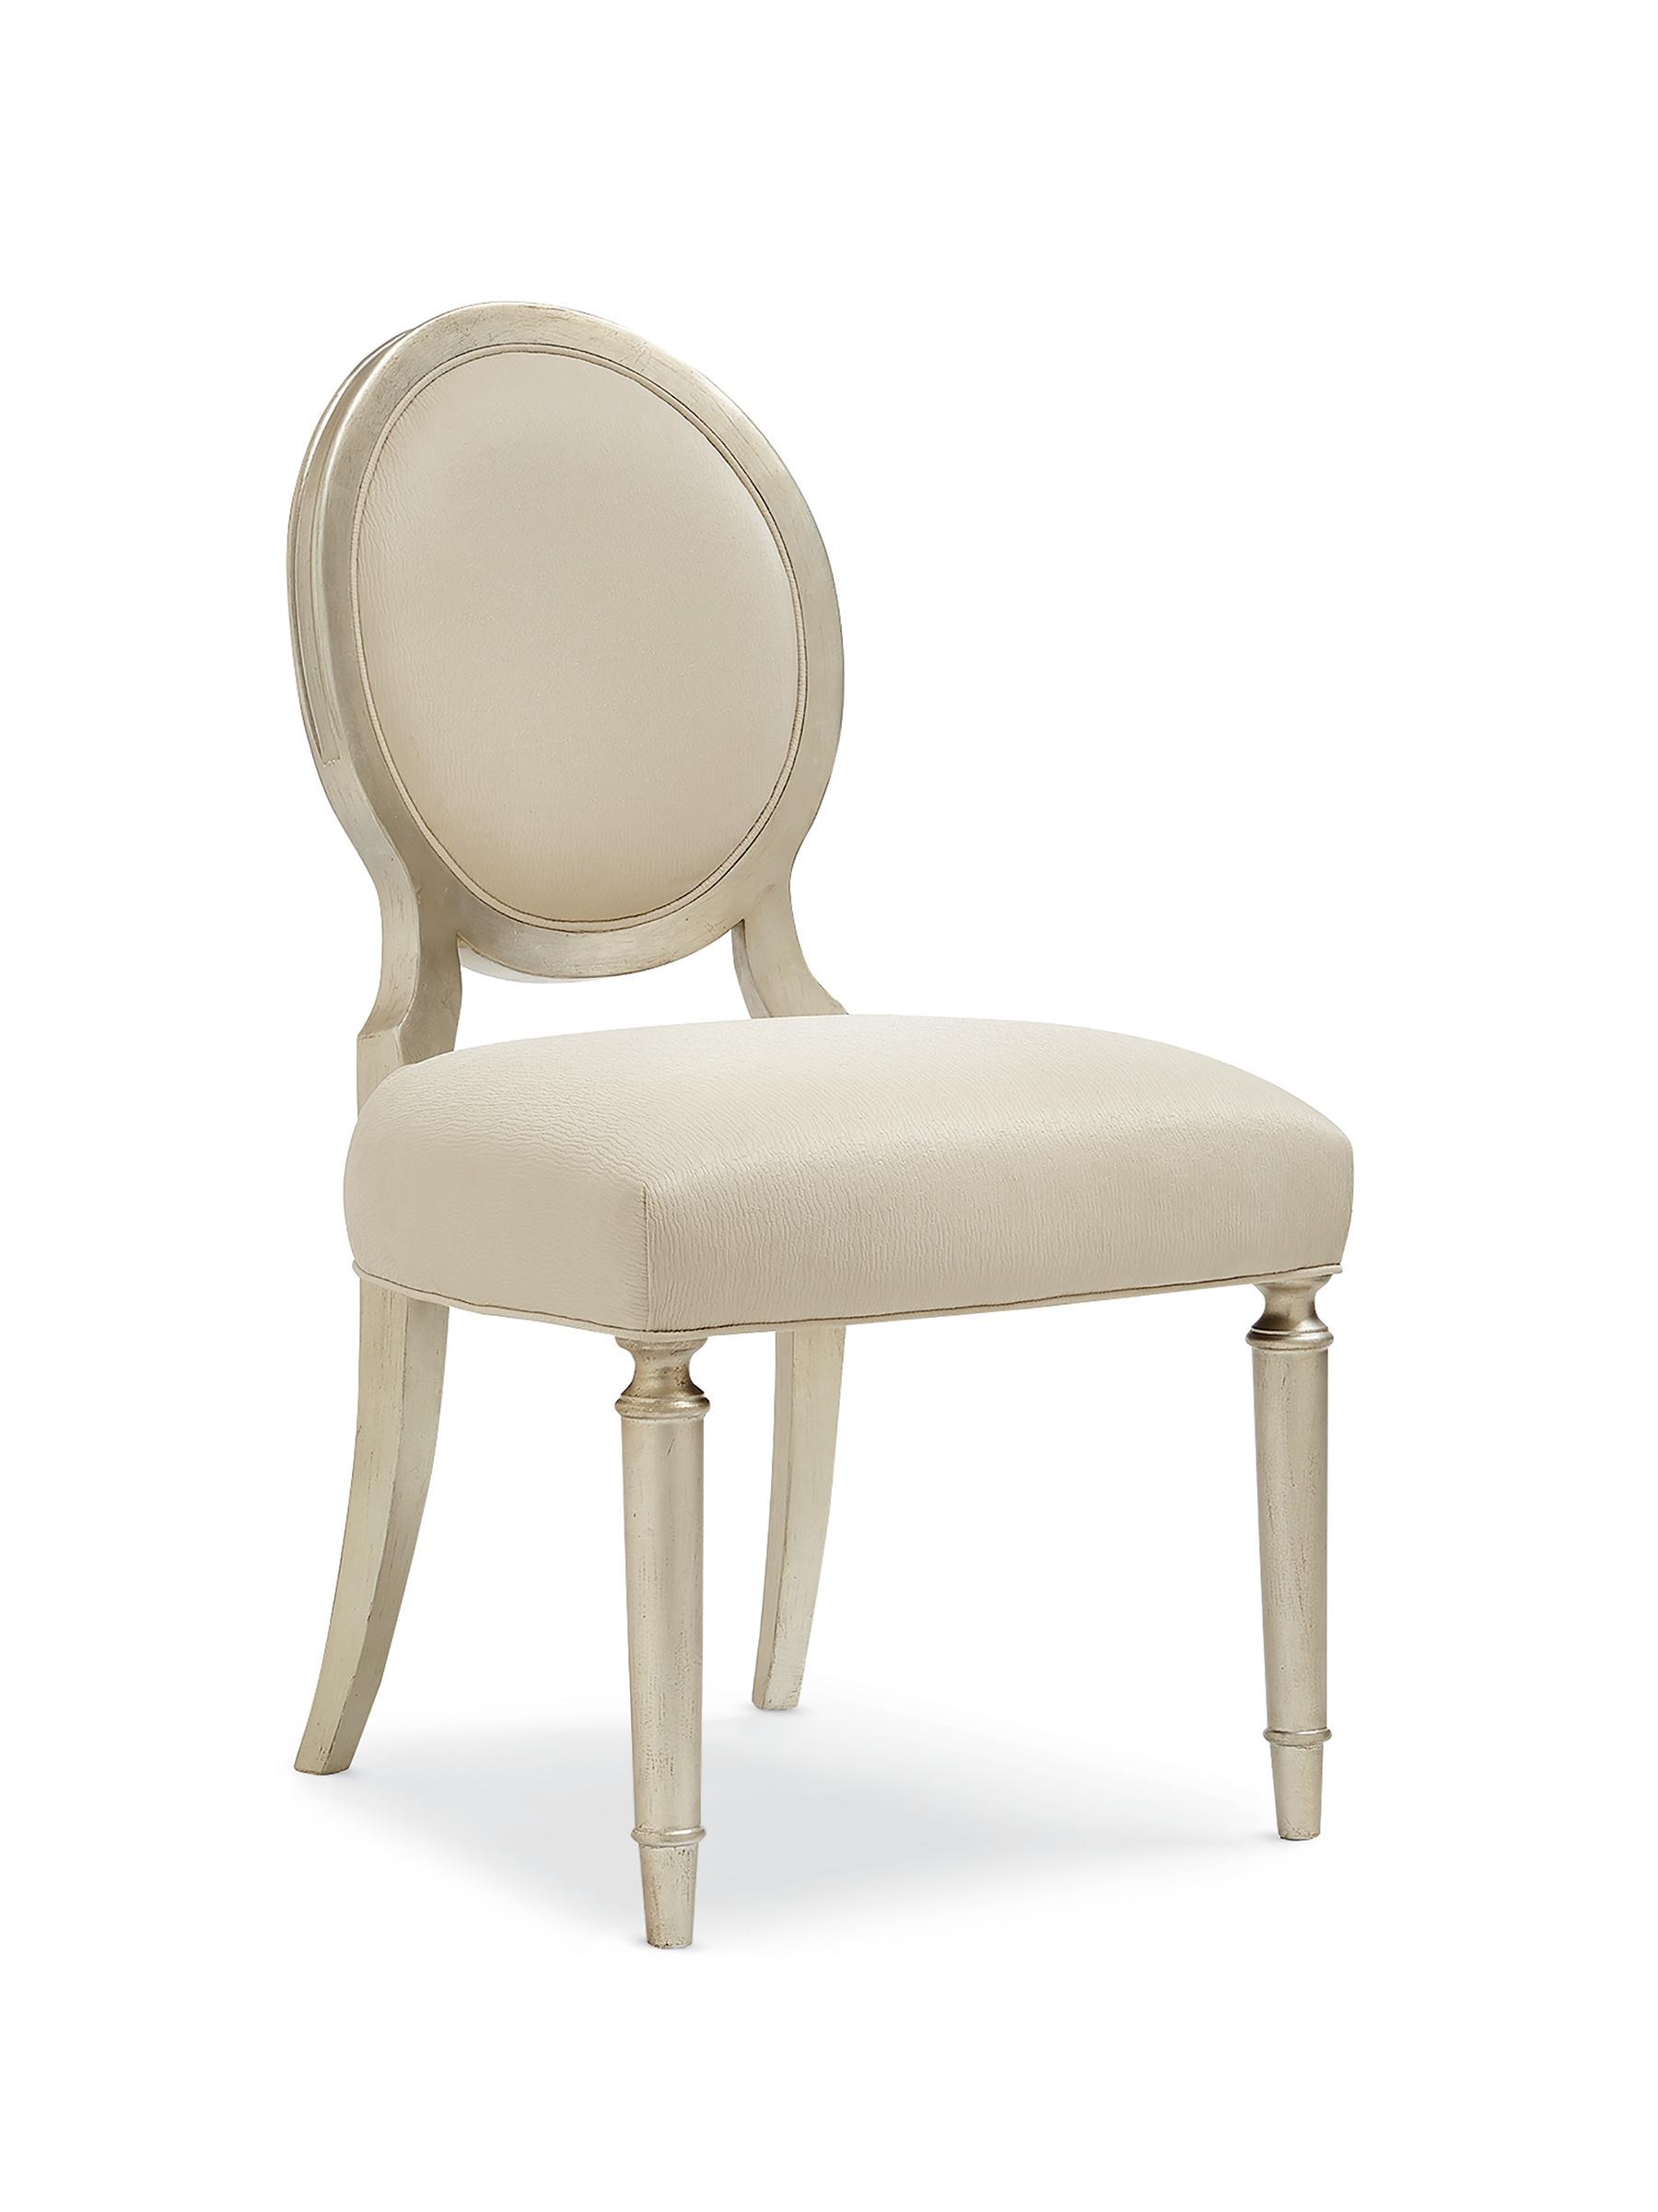 Contemporary Dining Chair Set MAY I JOIN YOU? TRA-SIDCHA-022-Set-2 in Silver, Ivory 